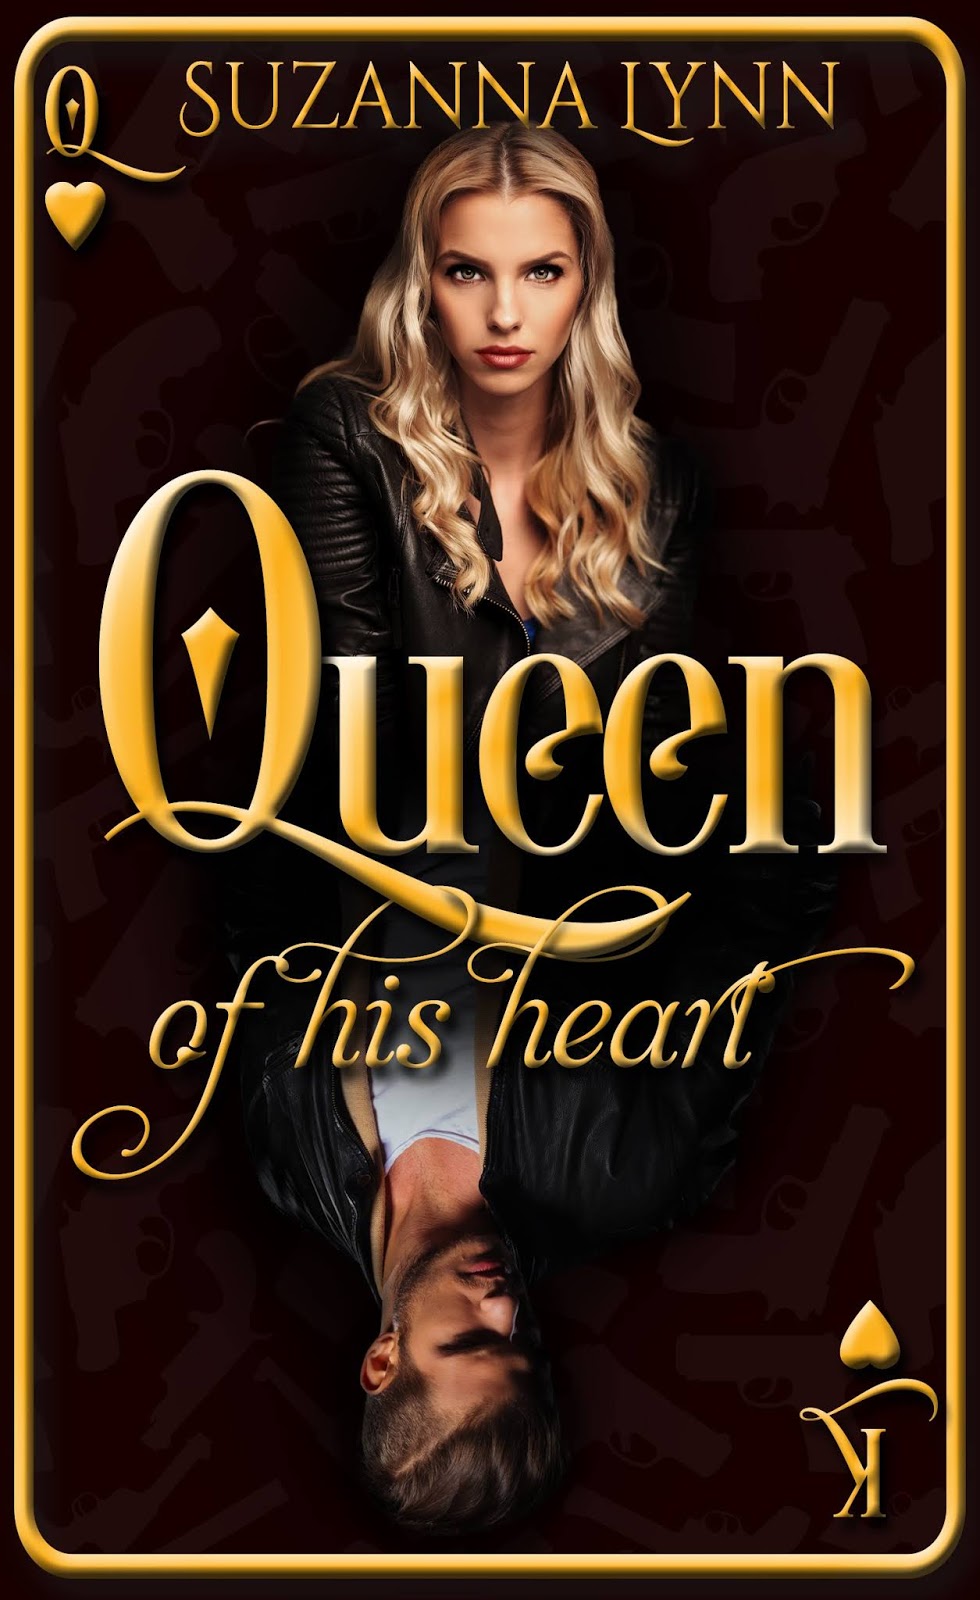 Queen of His Heart Release Blitz with Suzanna Lynn.